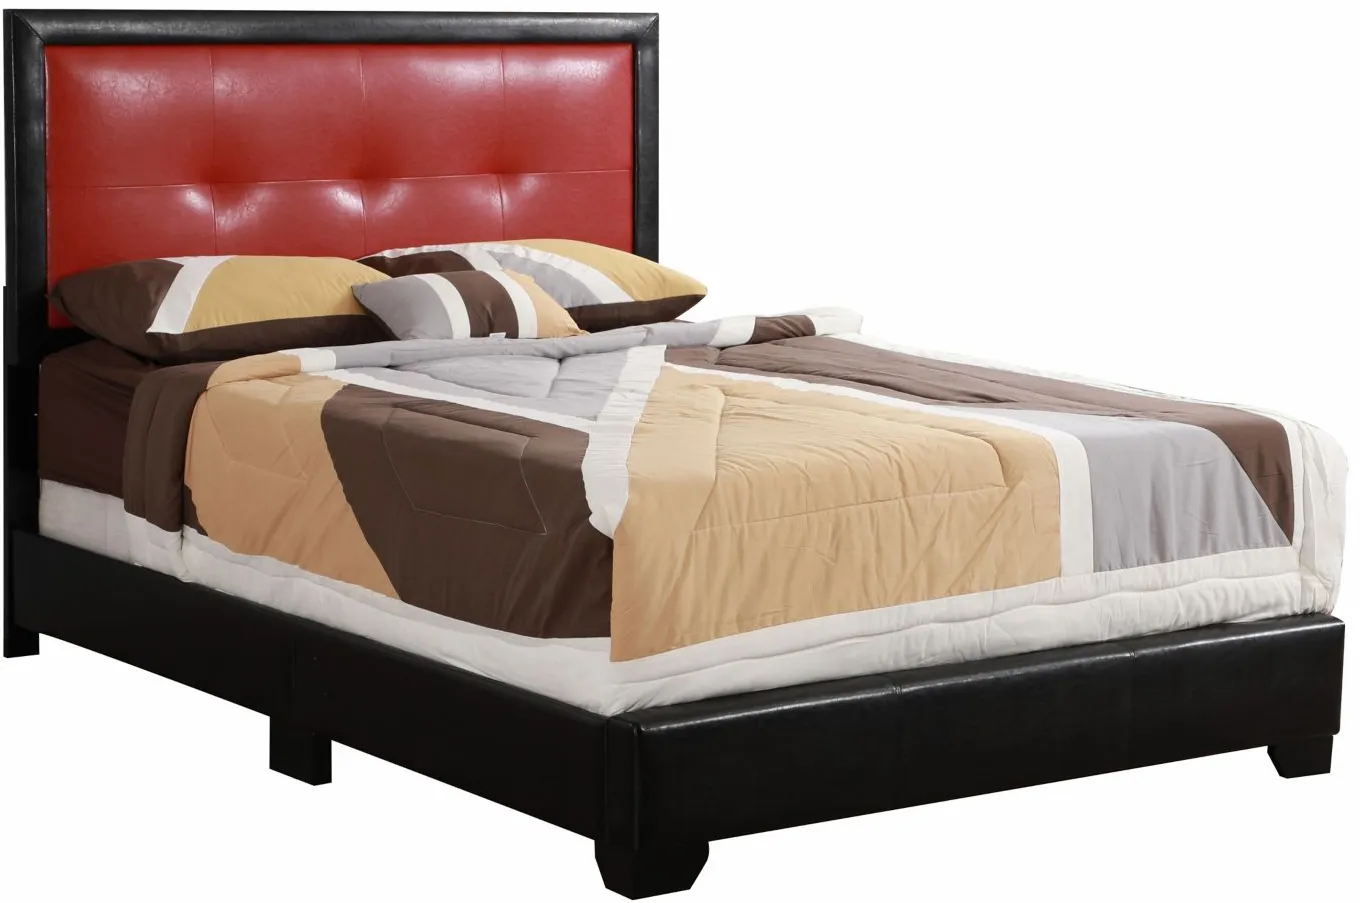 Panello King Bed in BLACK by Glory Furniture